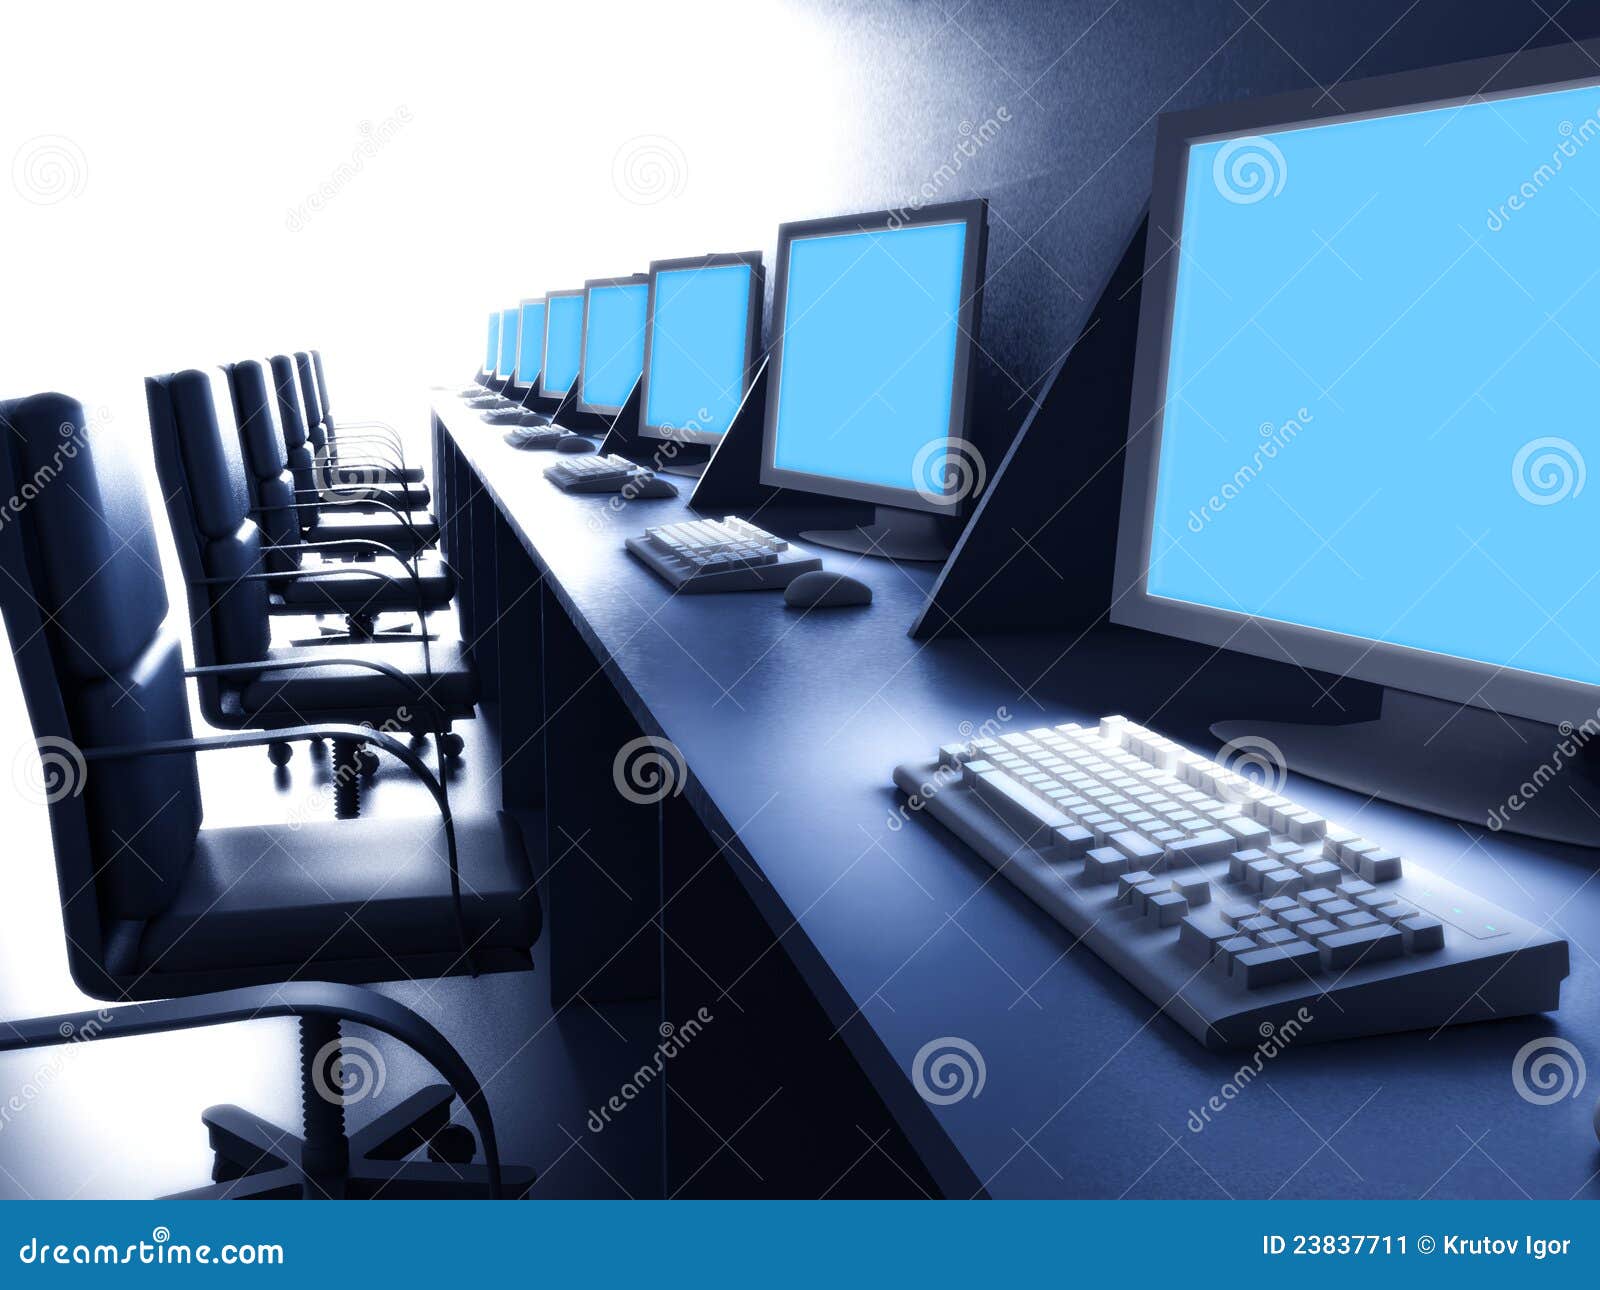 row of computers on desk